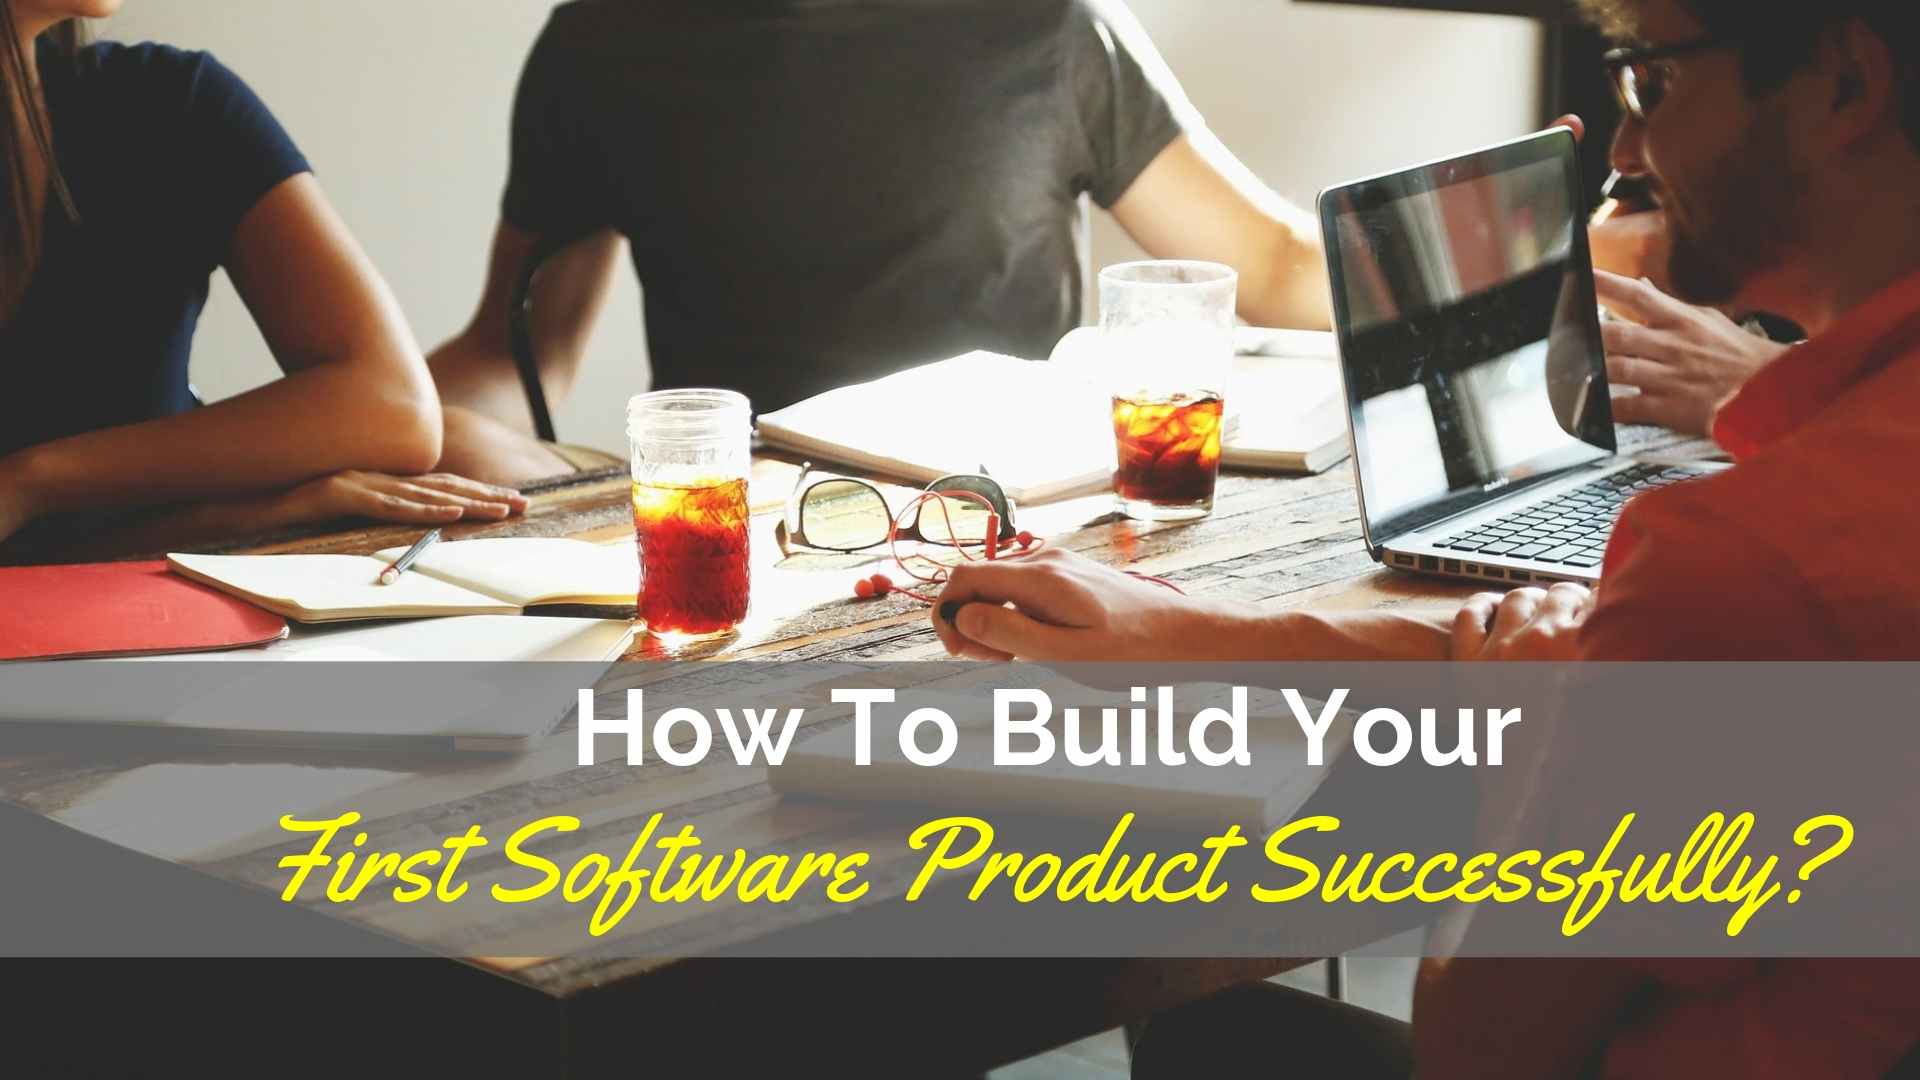 How To Build Your First Software Product Successfully?